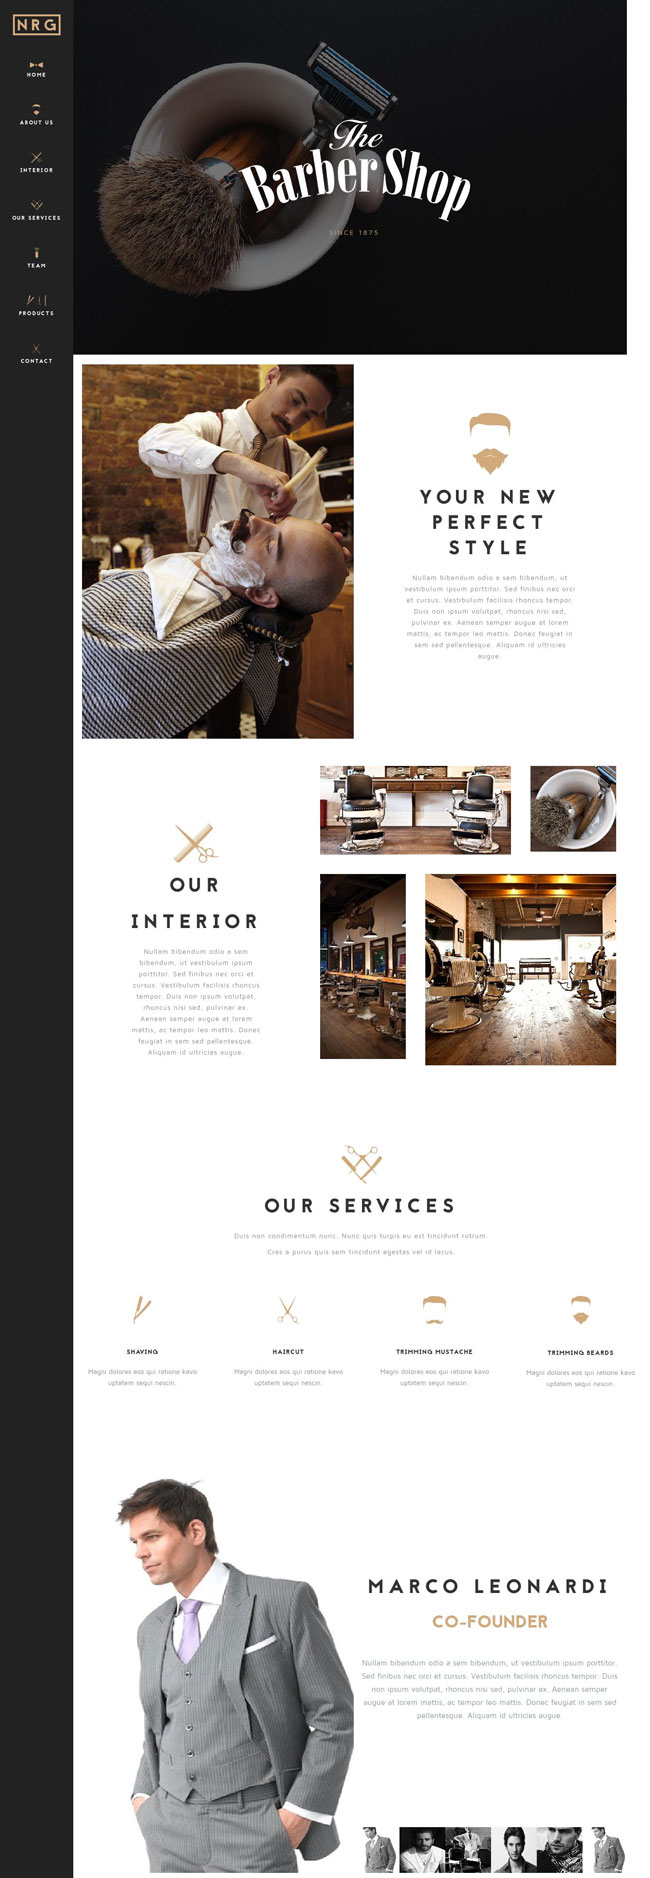 NRG-Barber-Shop-One-Page-Theme-For-Hair-Salon